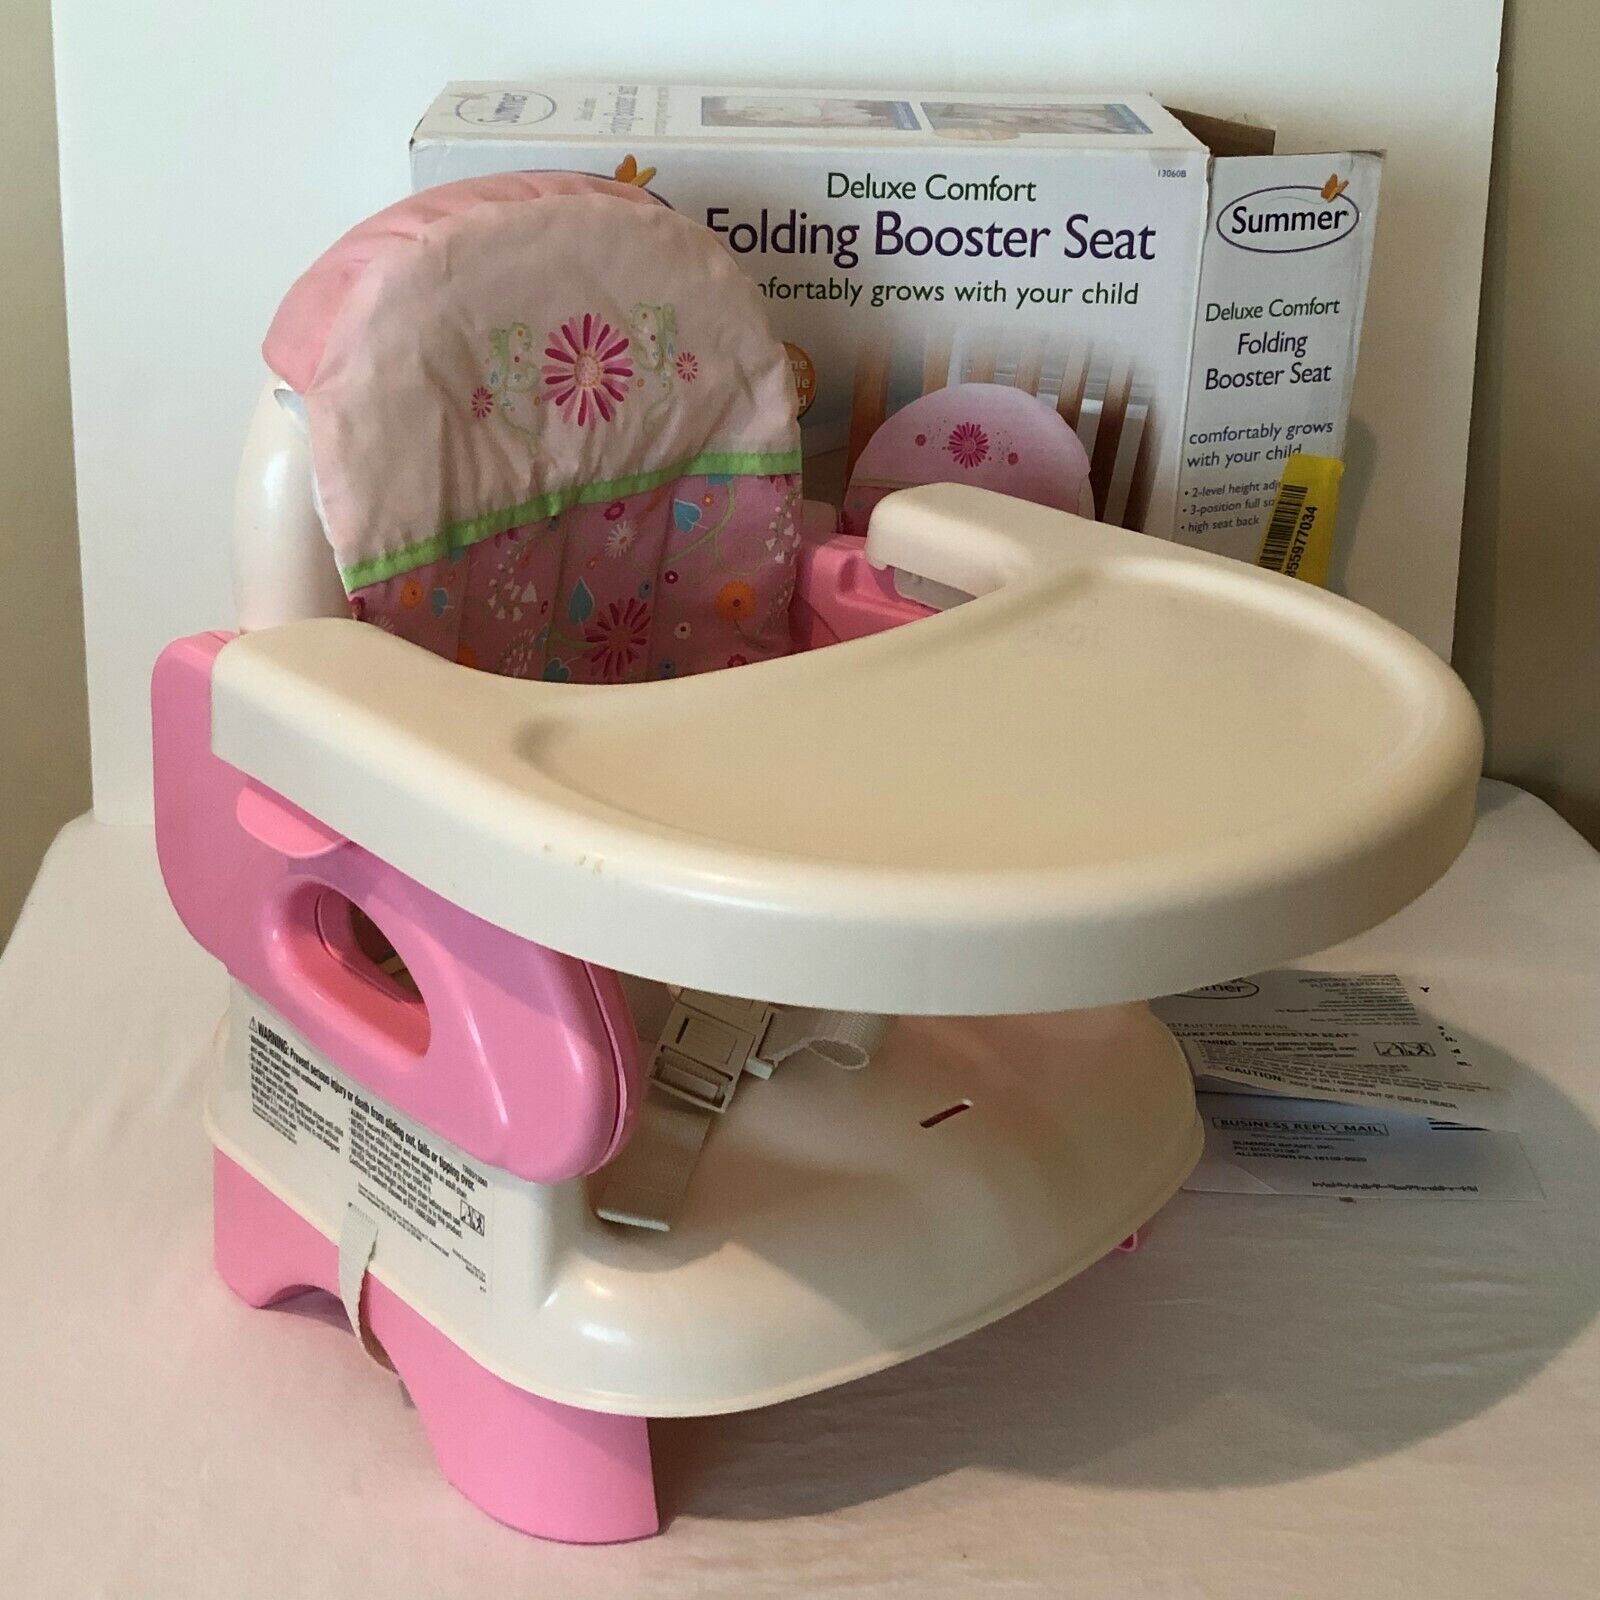 Summer Folding Booster Seat Deluxe Comfort High Chair Tray Pink Infant Toddler